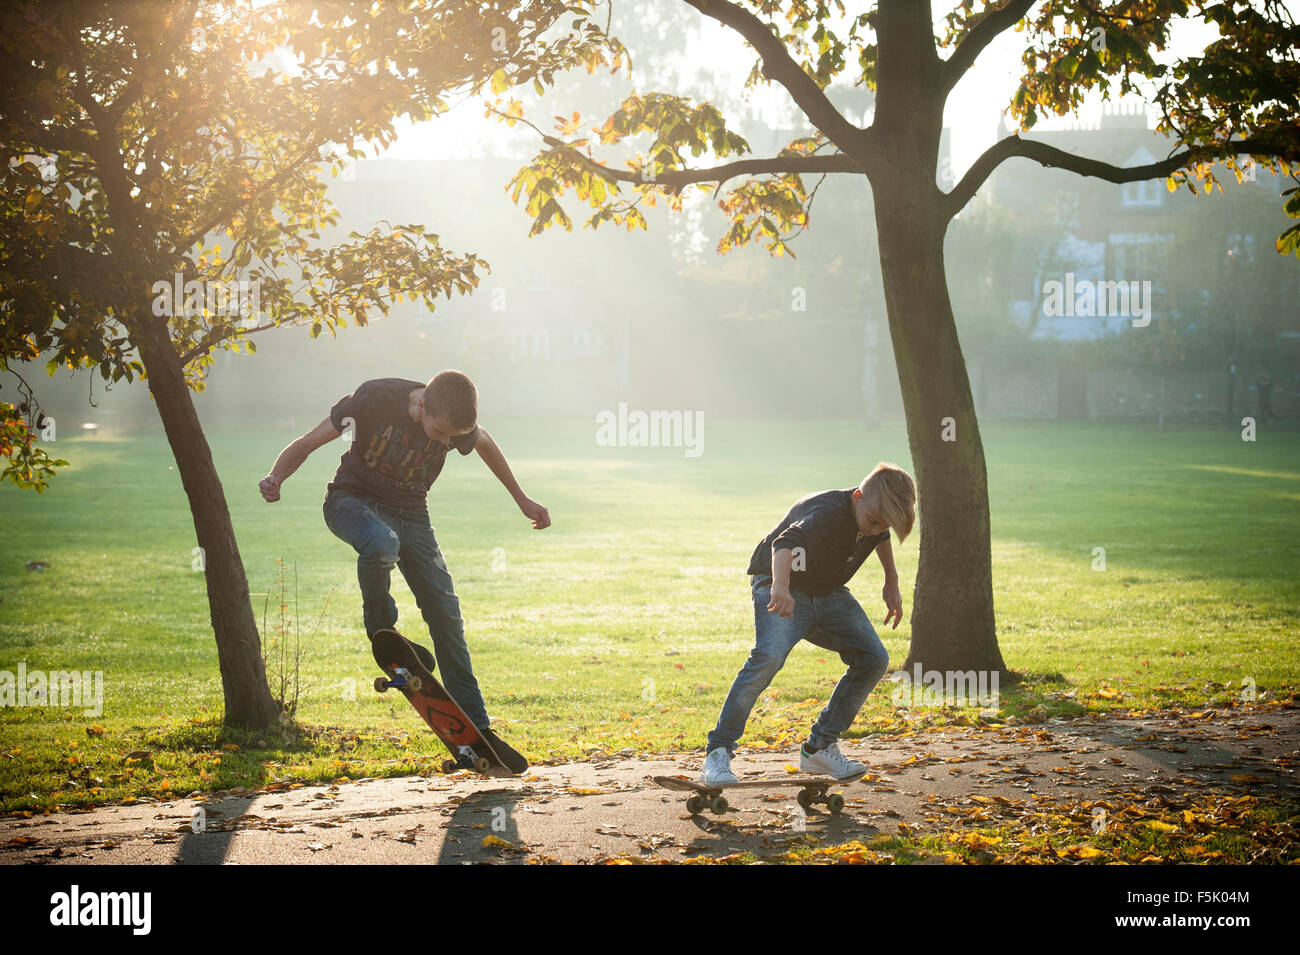 Skateboarding on a sunny autumnal day in a London park Stock Photo